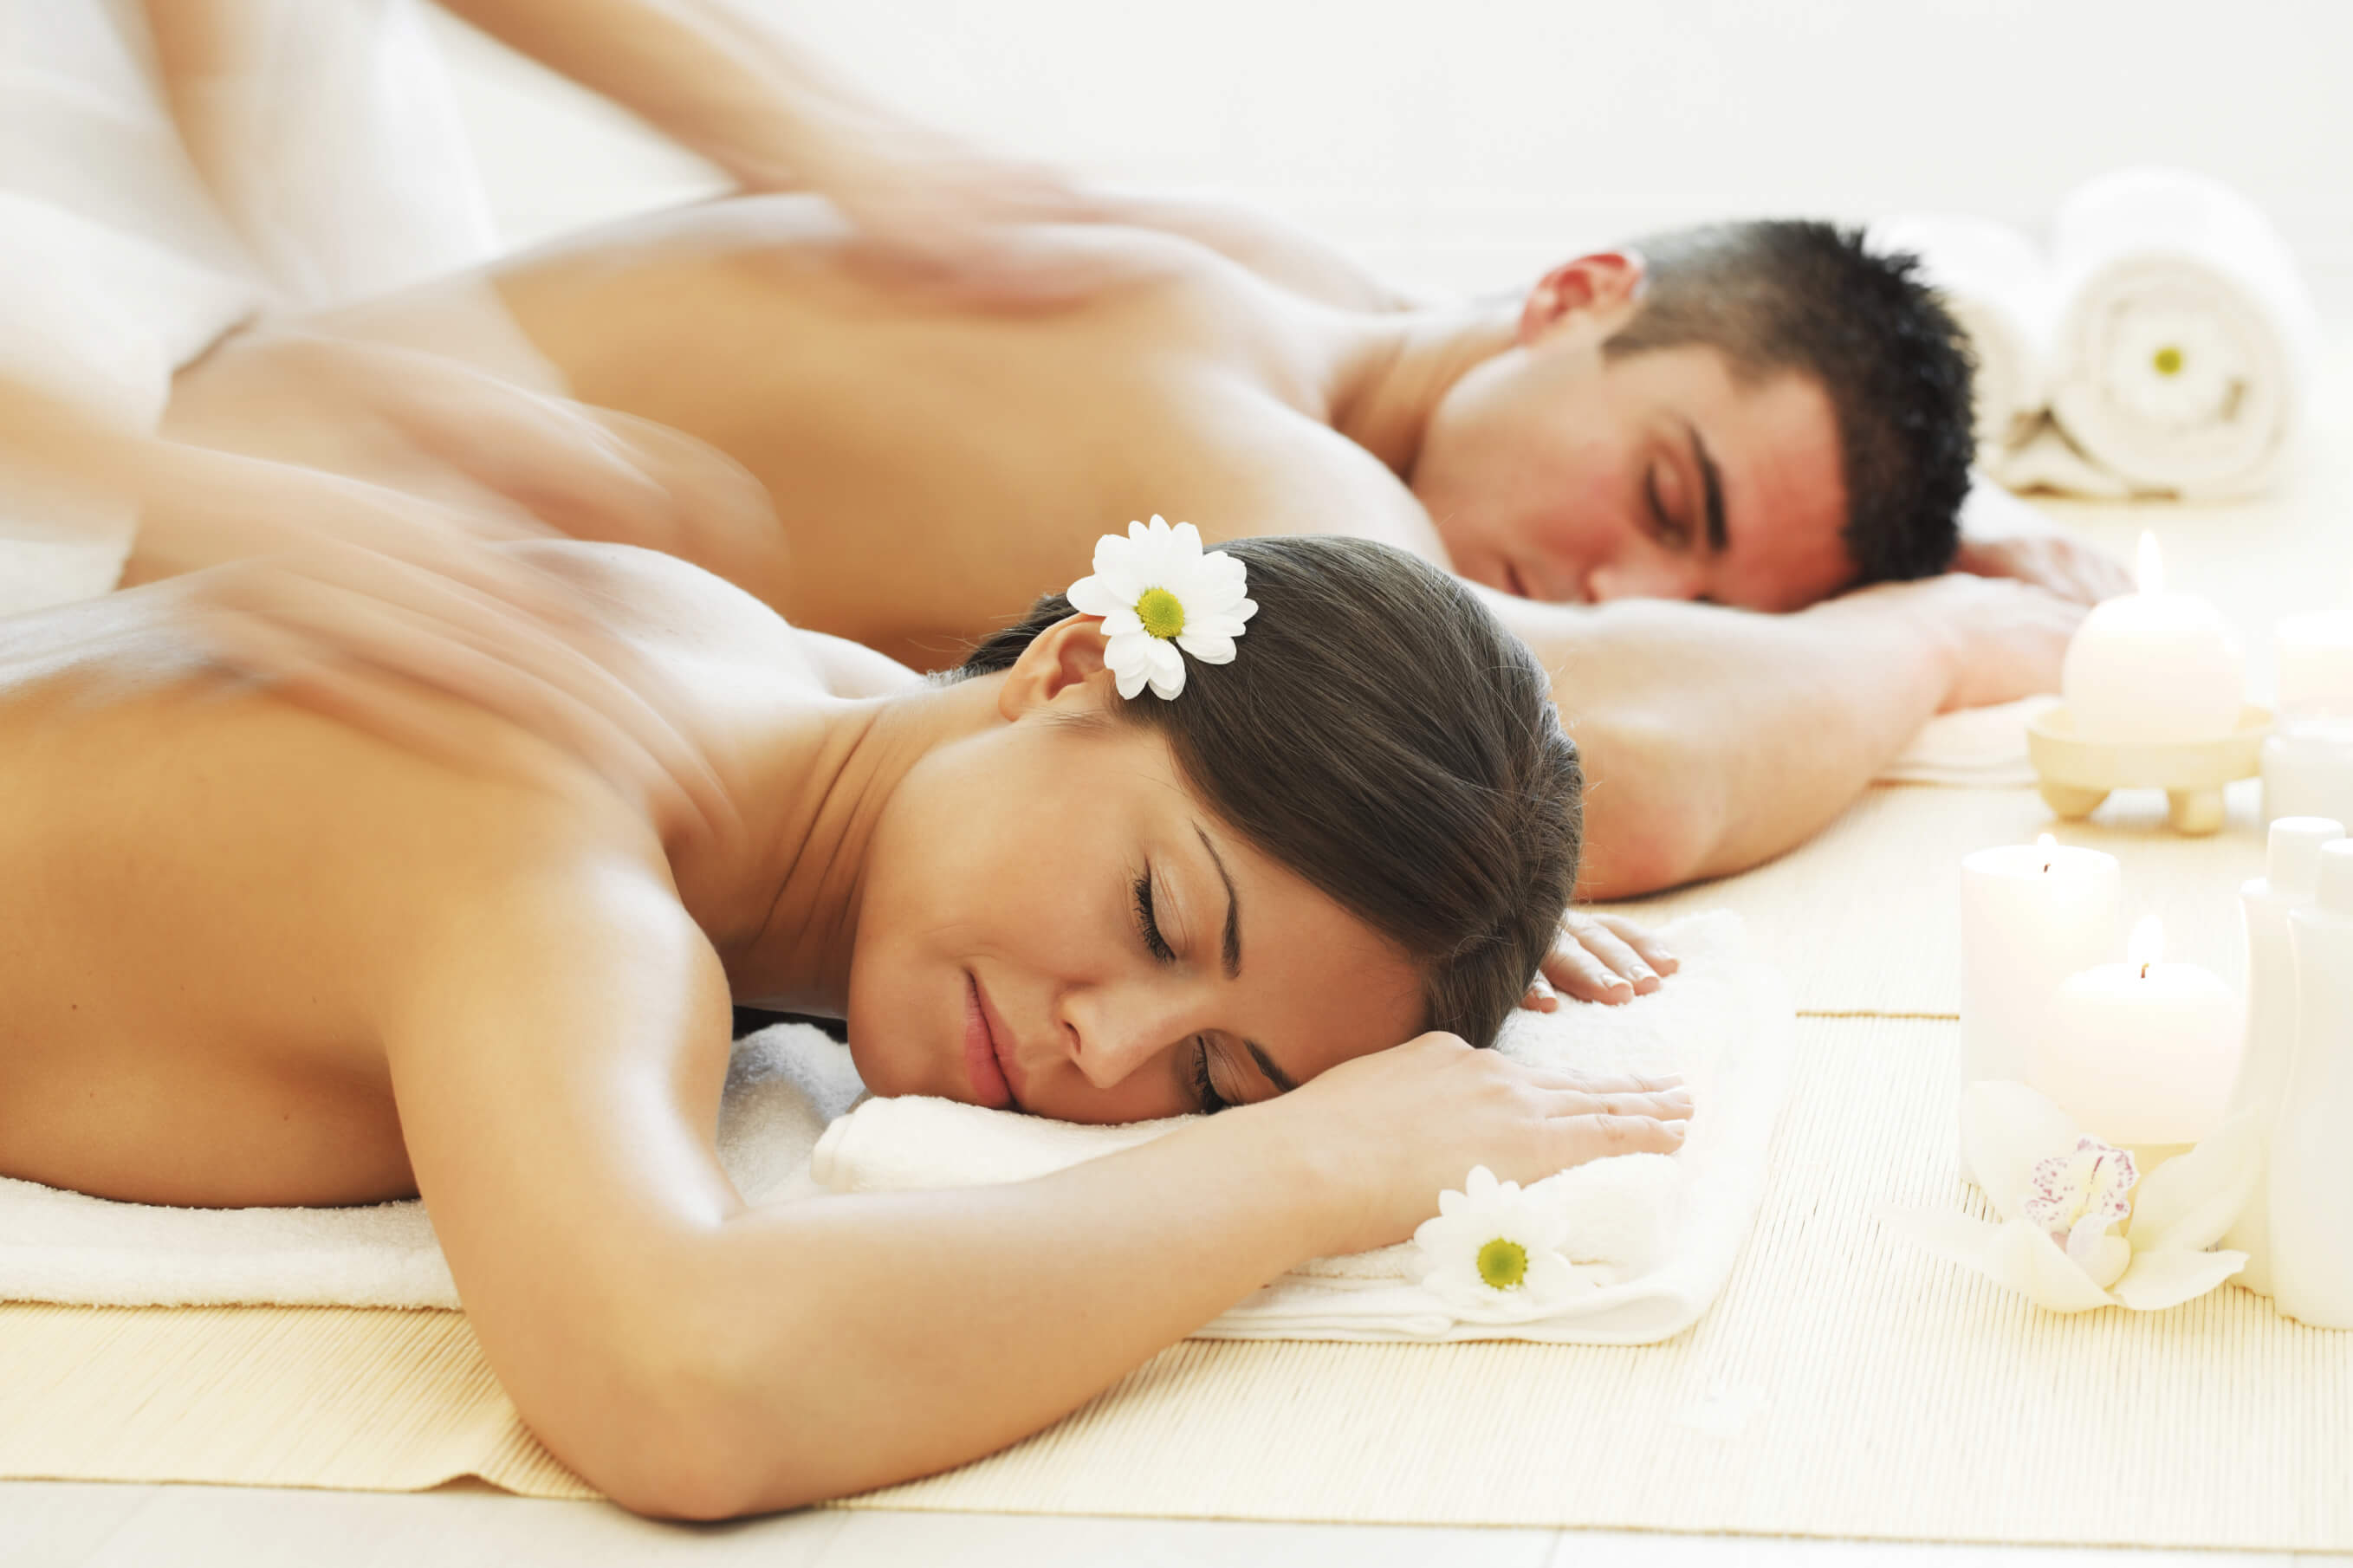 Personalize Your Therapeutic Therapeutic massage Remedies